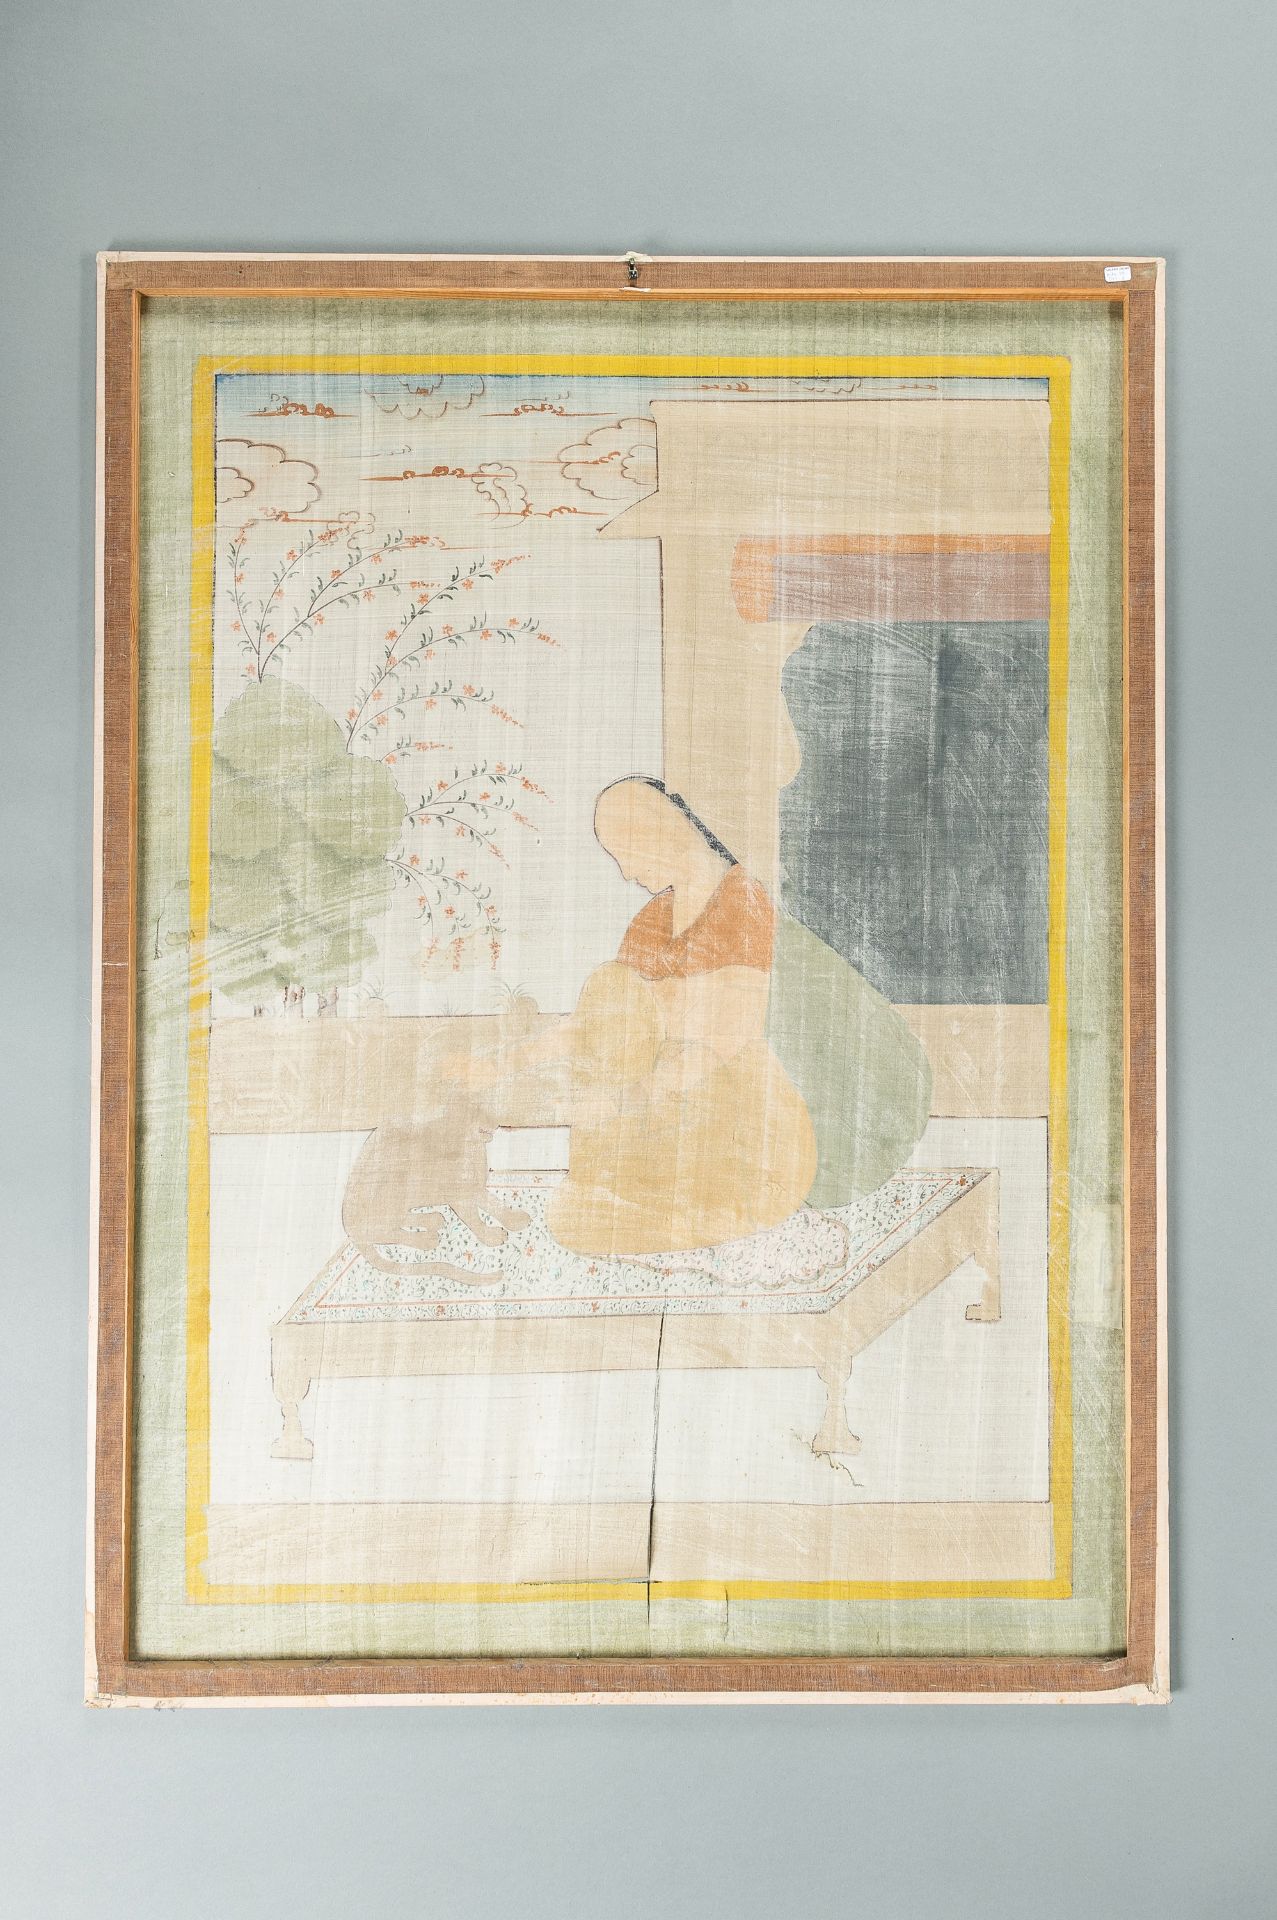 A LARGE INDIAN SILK PAINTING OF A NOBLEWOMAN WITH CAT - Image 7 of 7